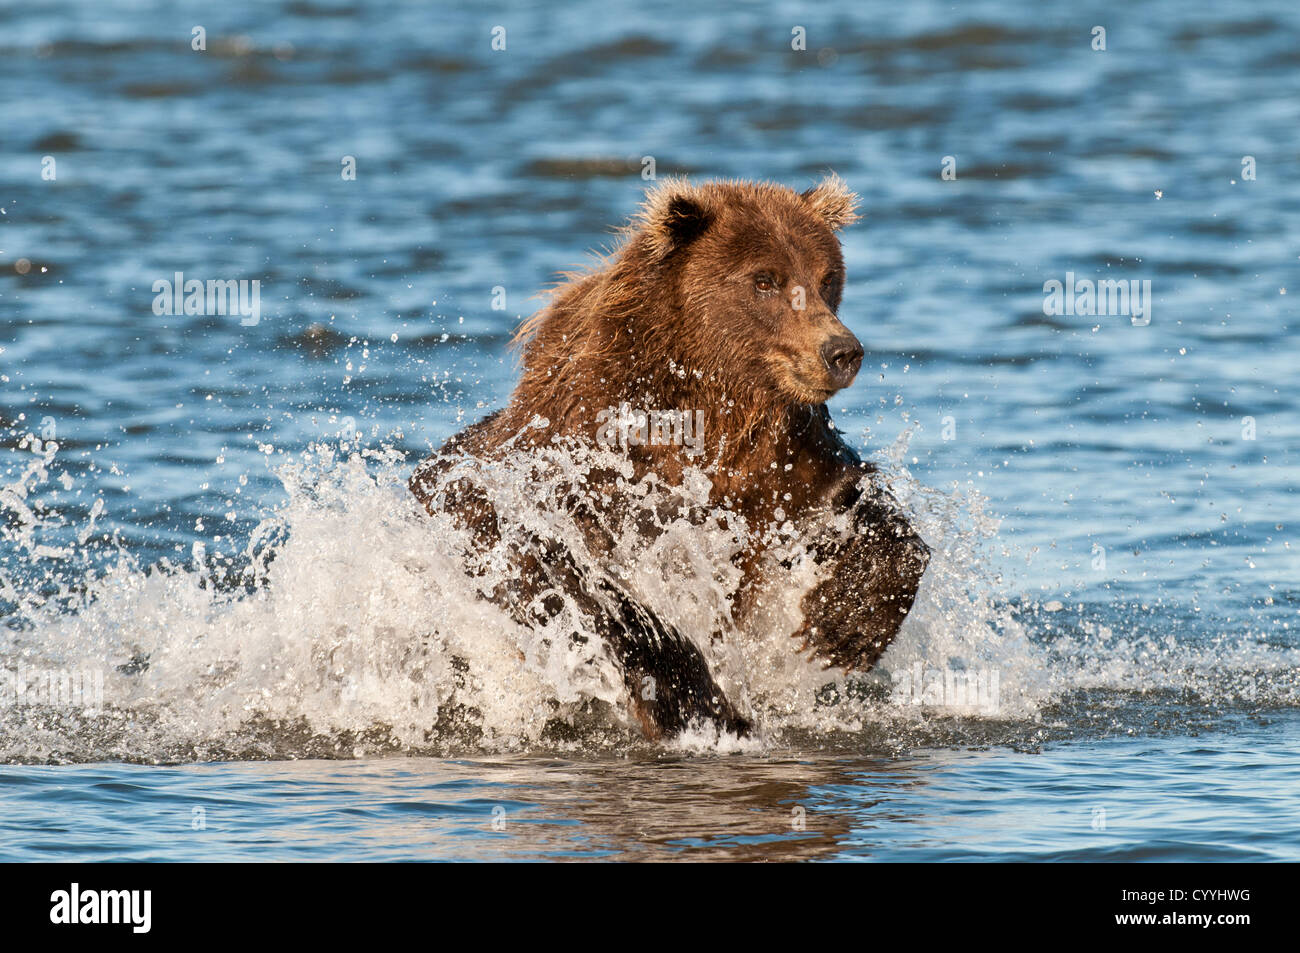 Ours brun chasing salmon ; Lake Clark National Park, AK Banque D'Images